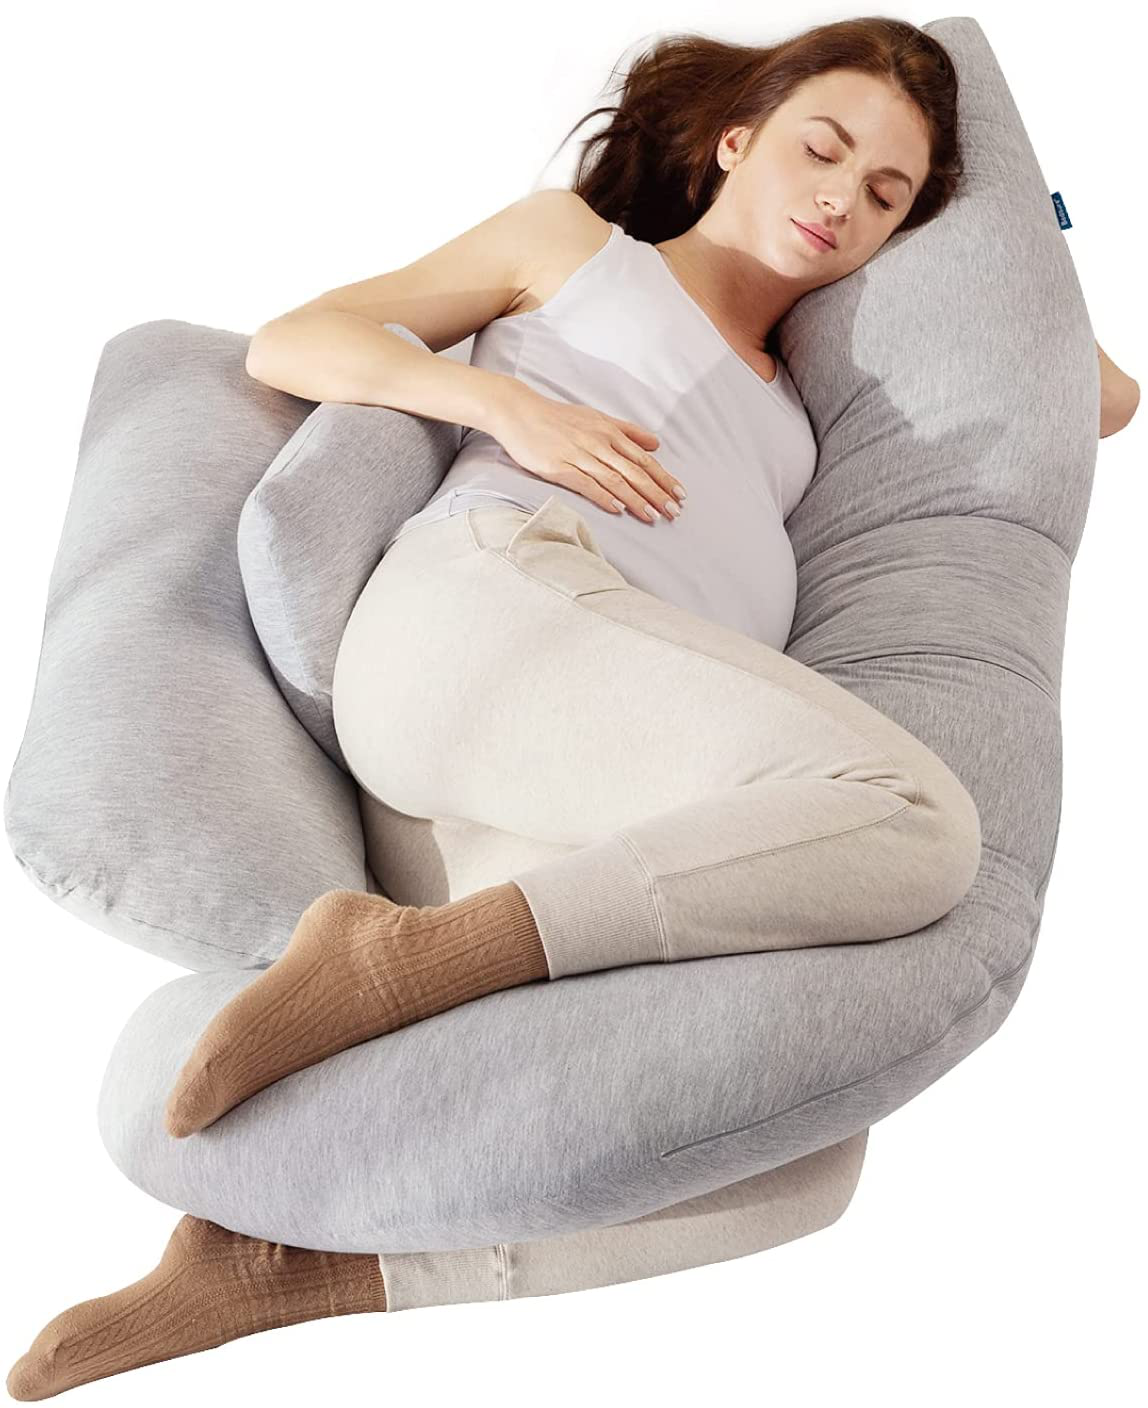 Bedsure Pregnancy Pillows for Sleeping, H-Shaped Adjustable Maternity Full Body Pillow for Pregnant Women with Washable Cover - Detachable Extension, Grey